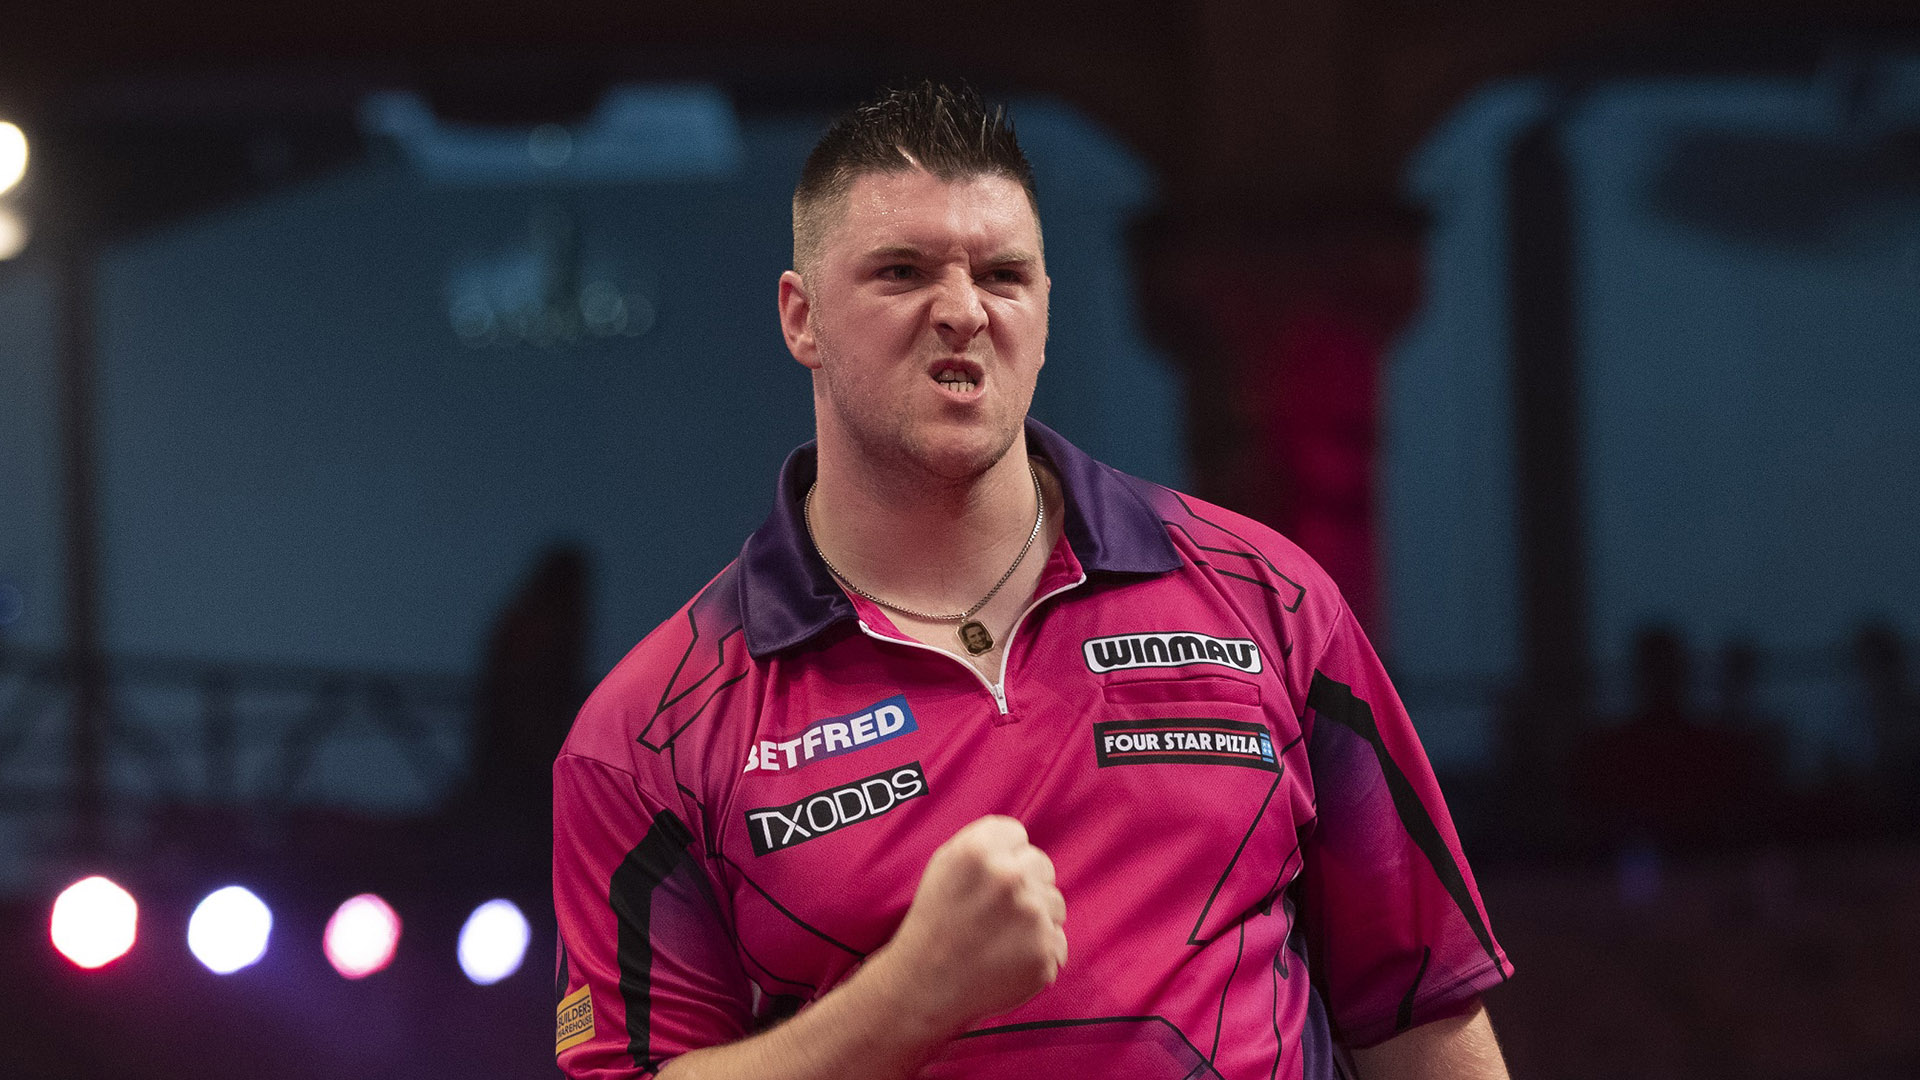 Darts results: Daryl Gurney wins first floor event of 2019 Players 25